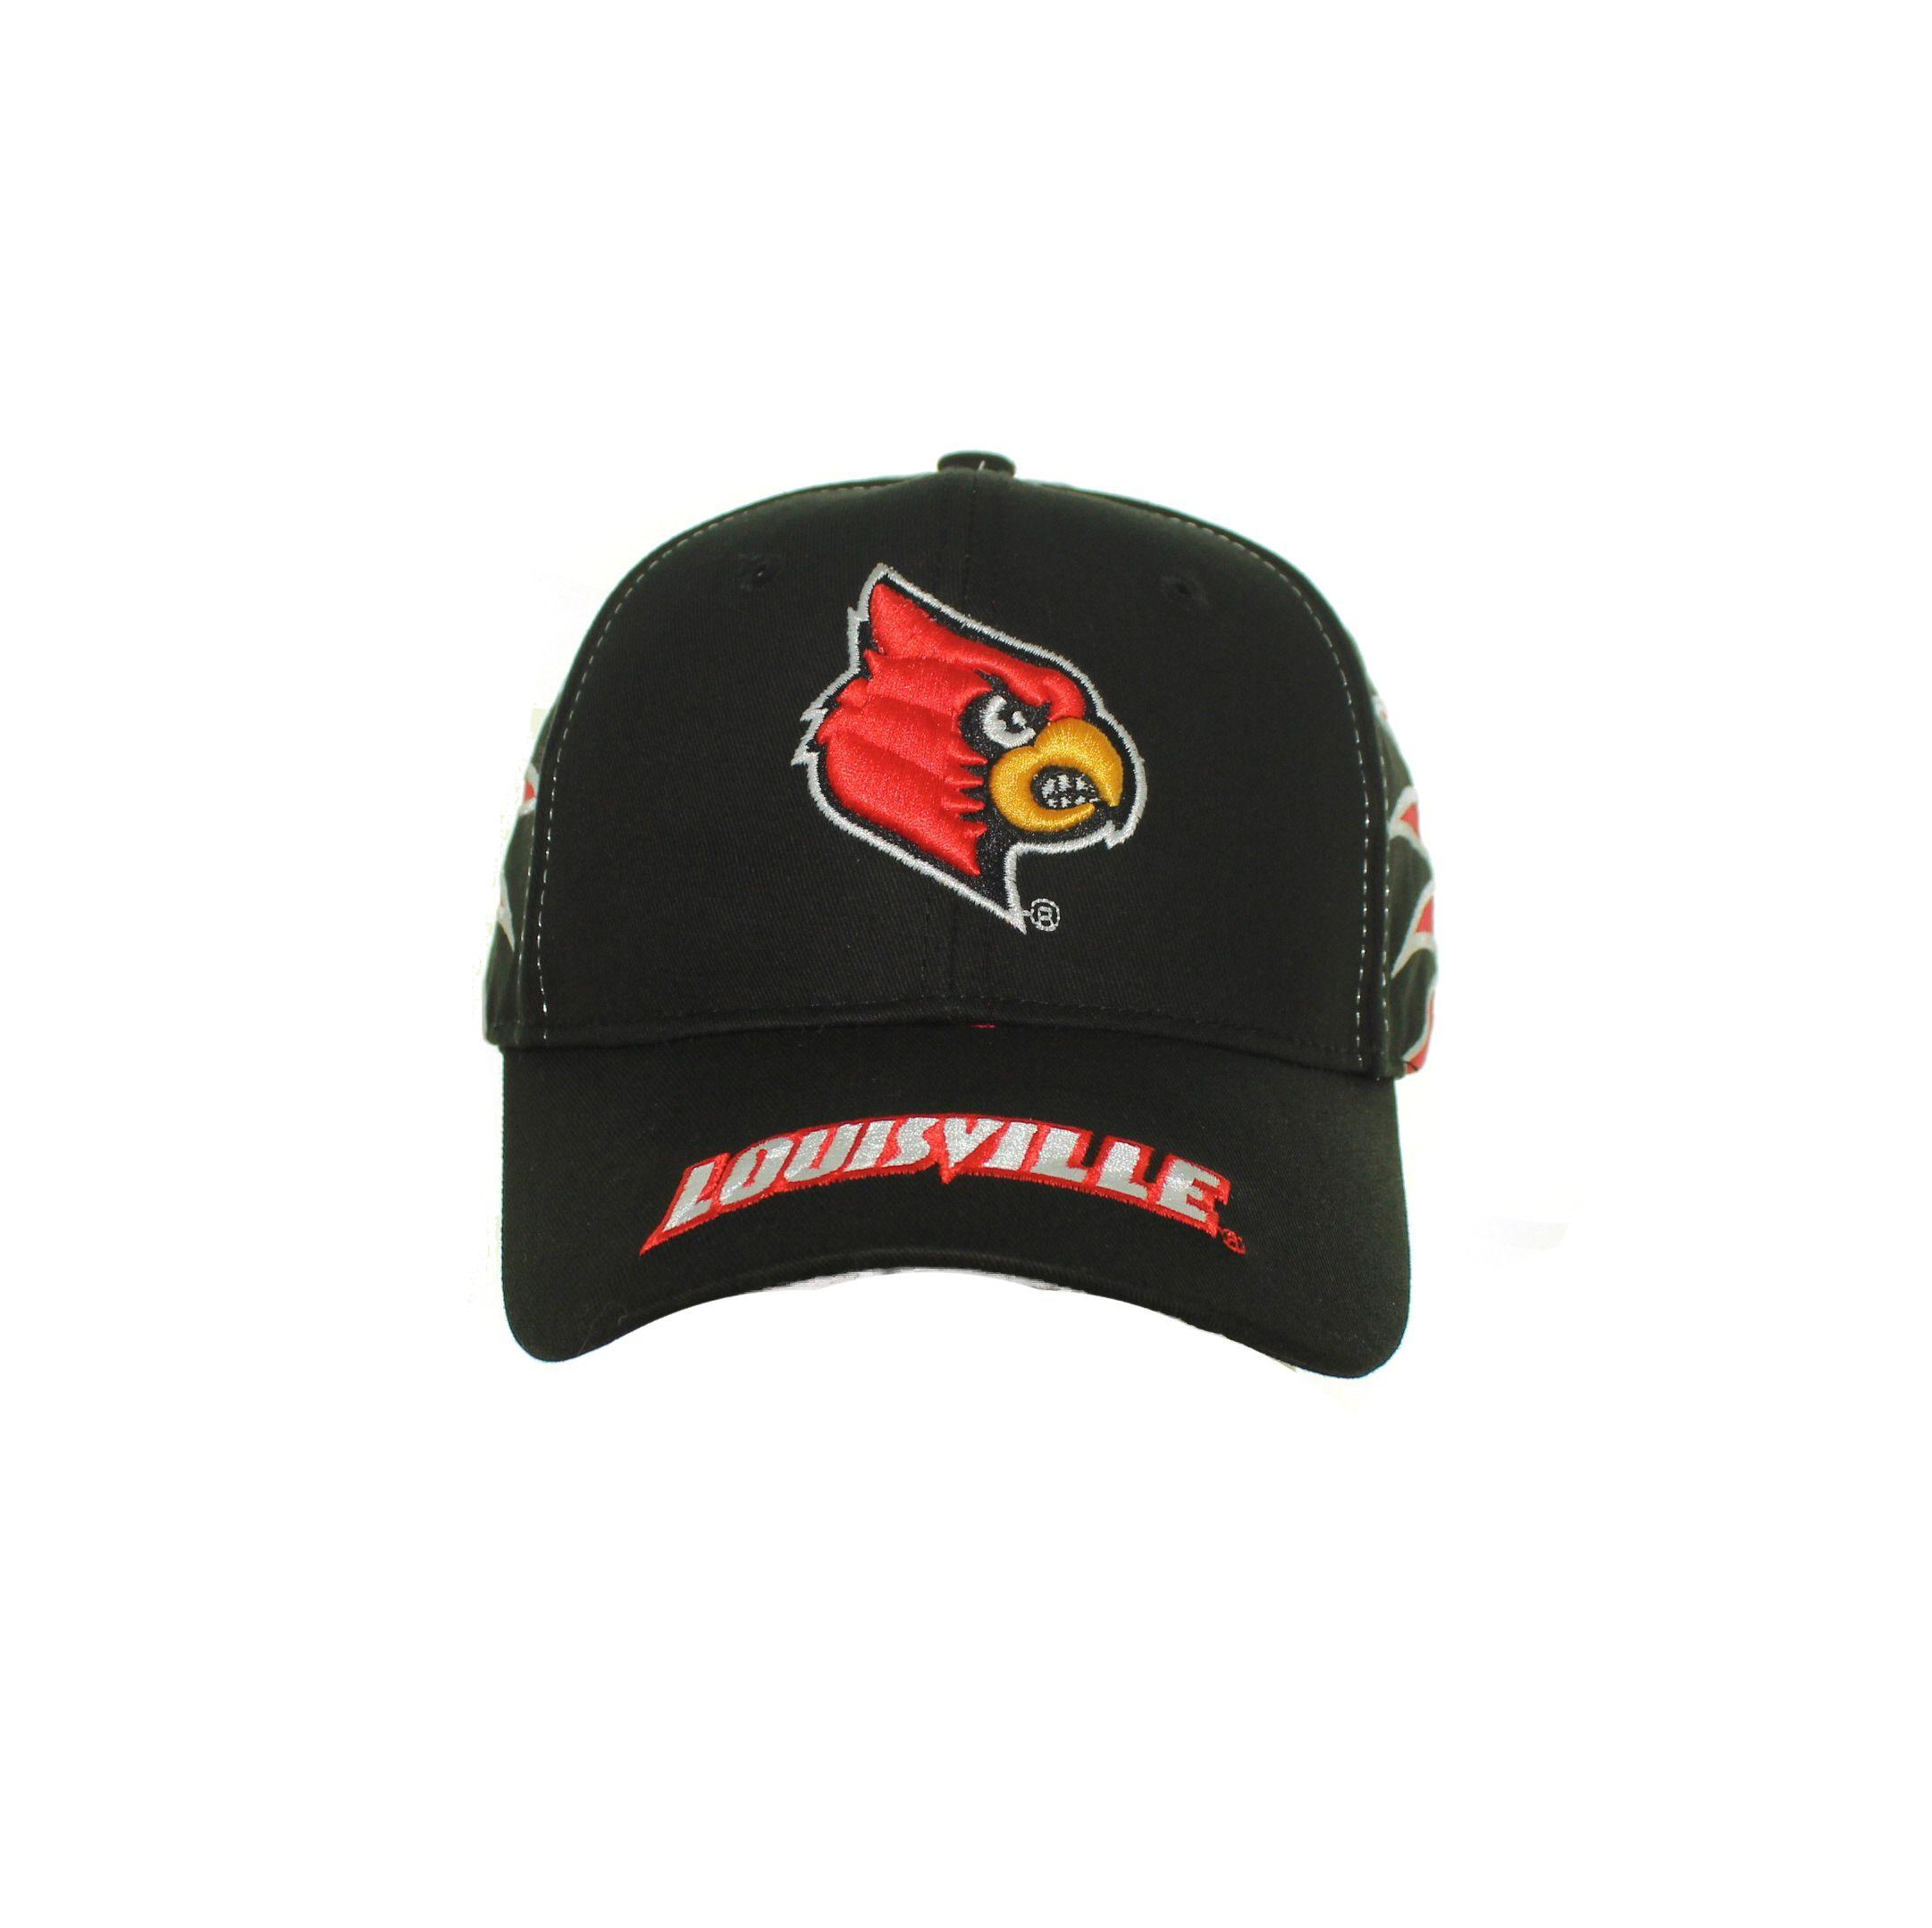 Black and Red Cardinals Logo - Louisville Cardinals – Red Cardinal Logo on Black and Red Adjustable ...